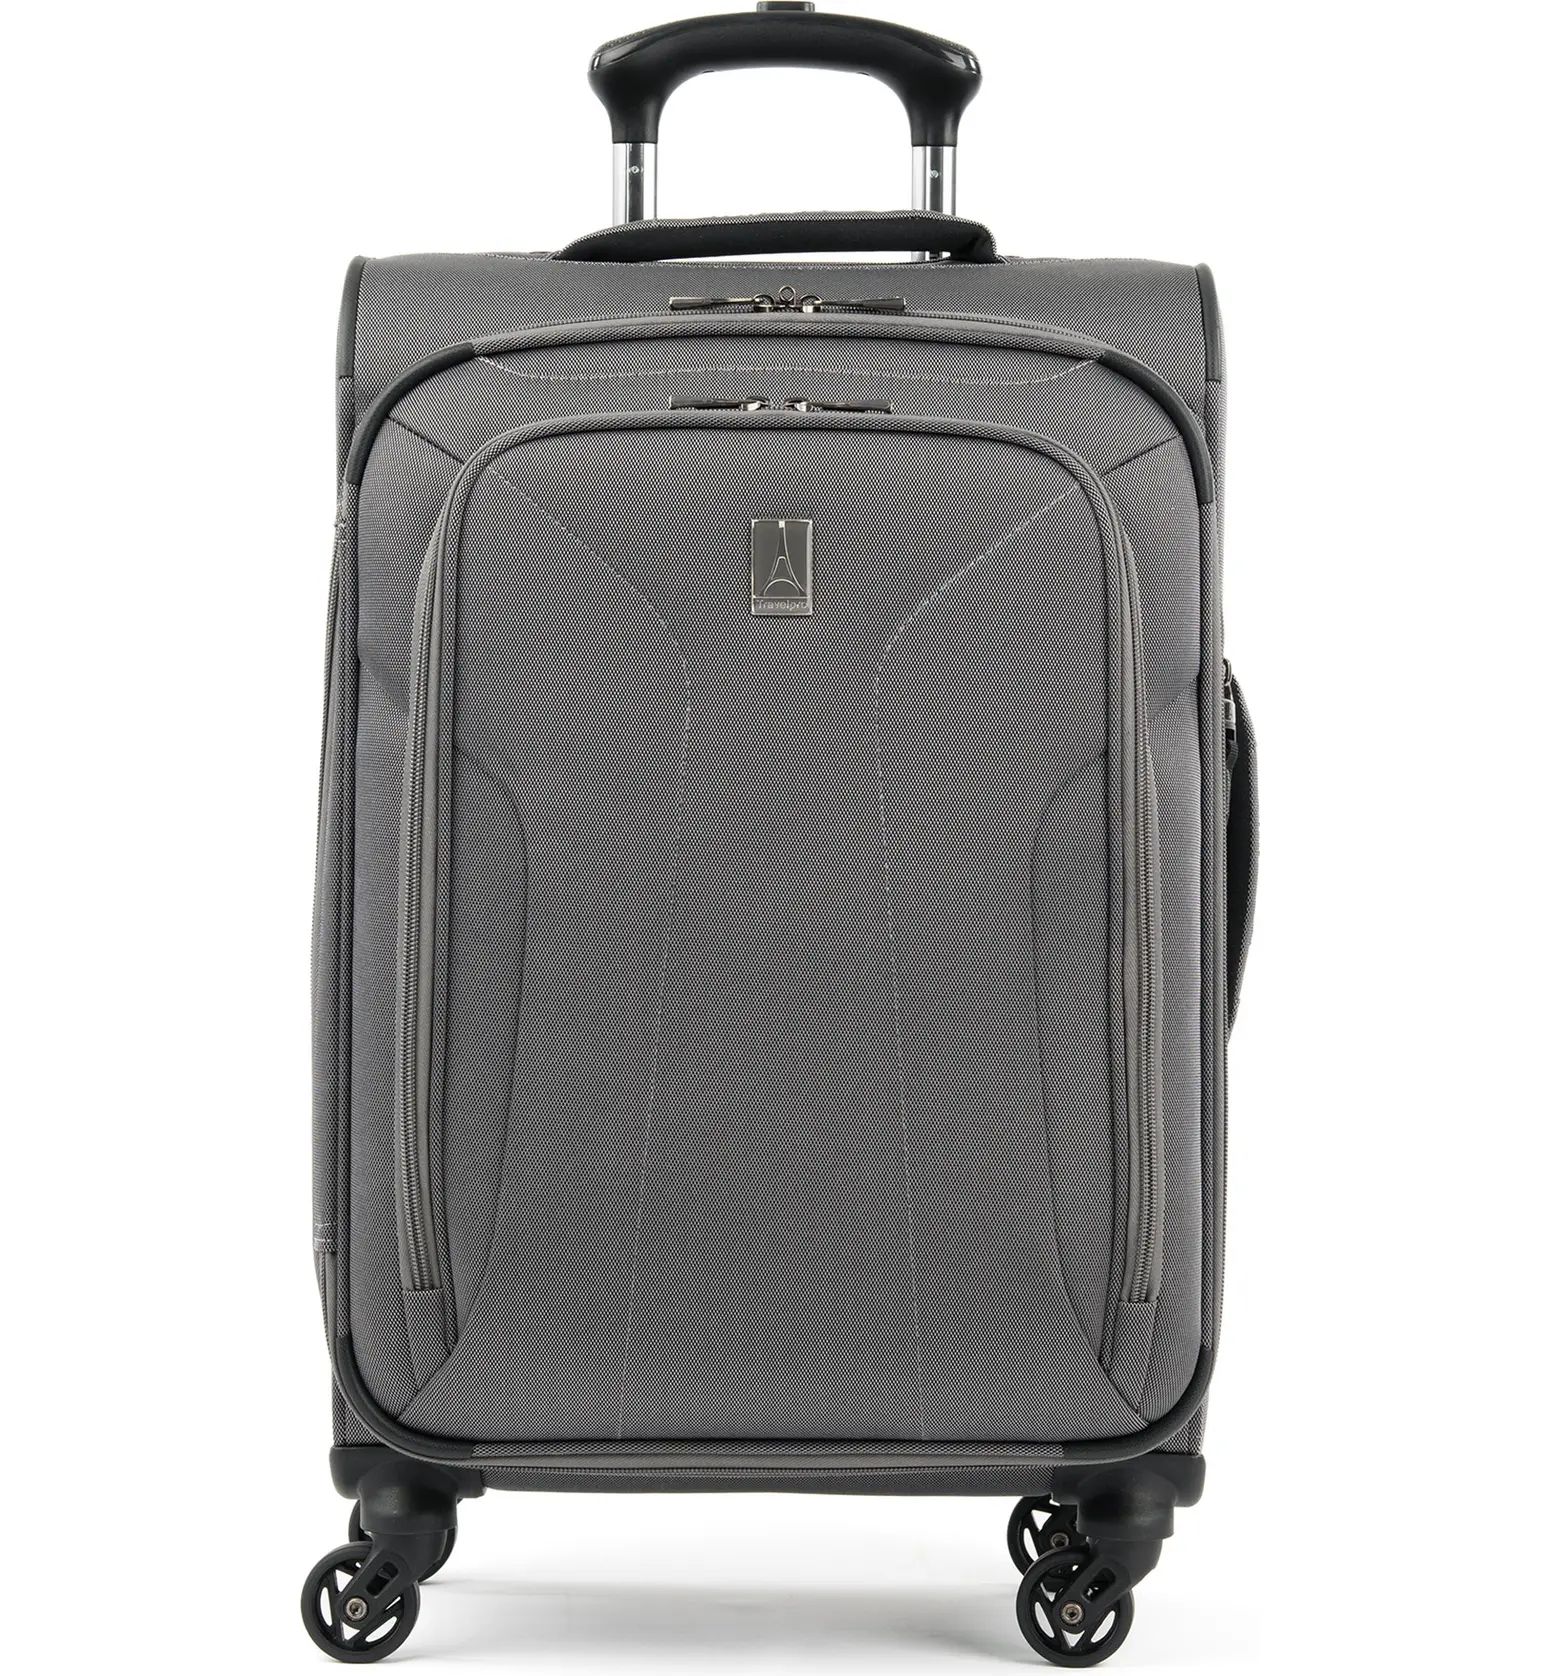 Pilot Air™ Elite 21" Expandable Carry-on Spinner Luggage | Nordstrom Rack